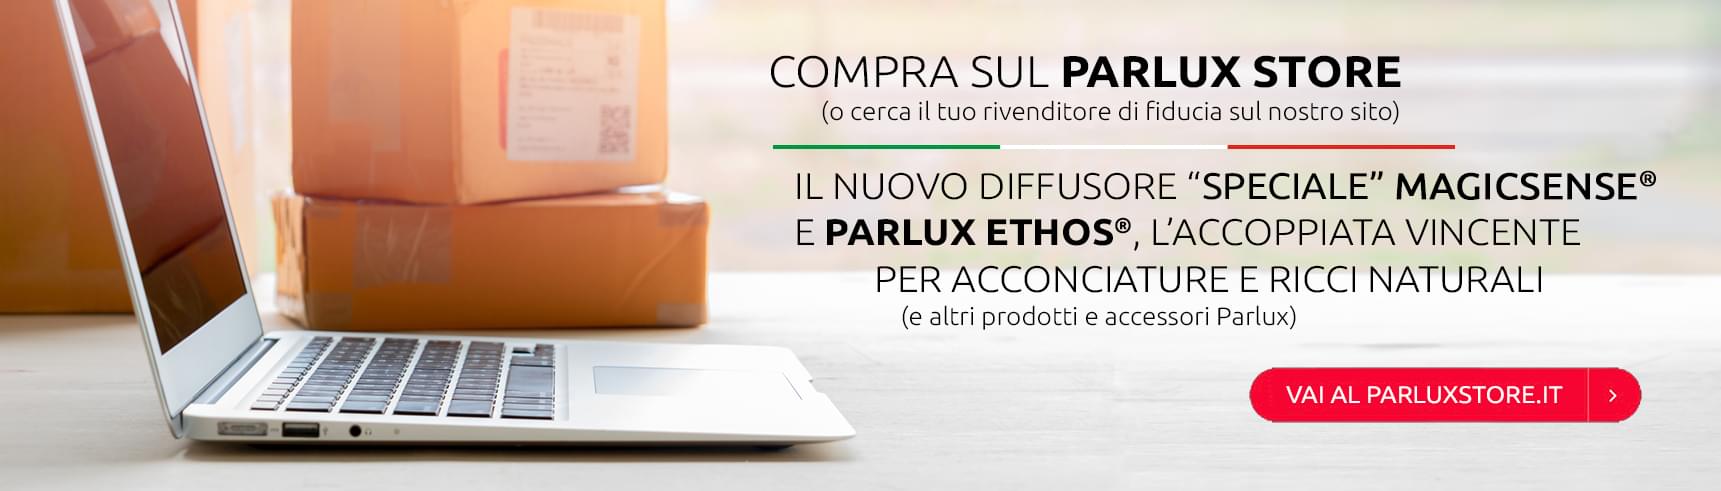 https://www.parlux.it/Content/images/banner-homepage.jpg